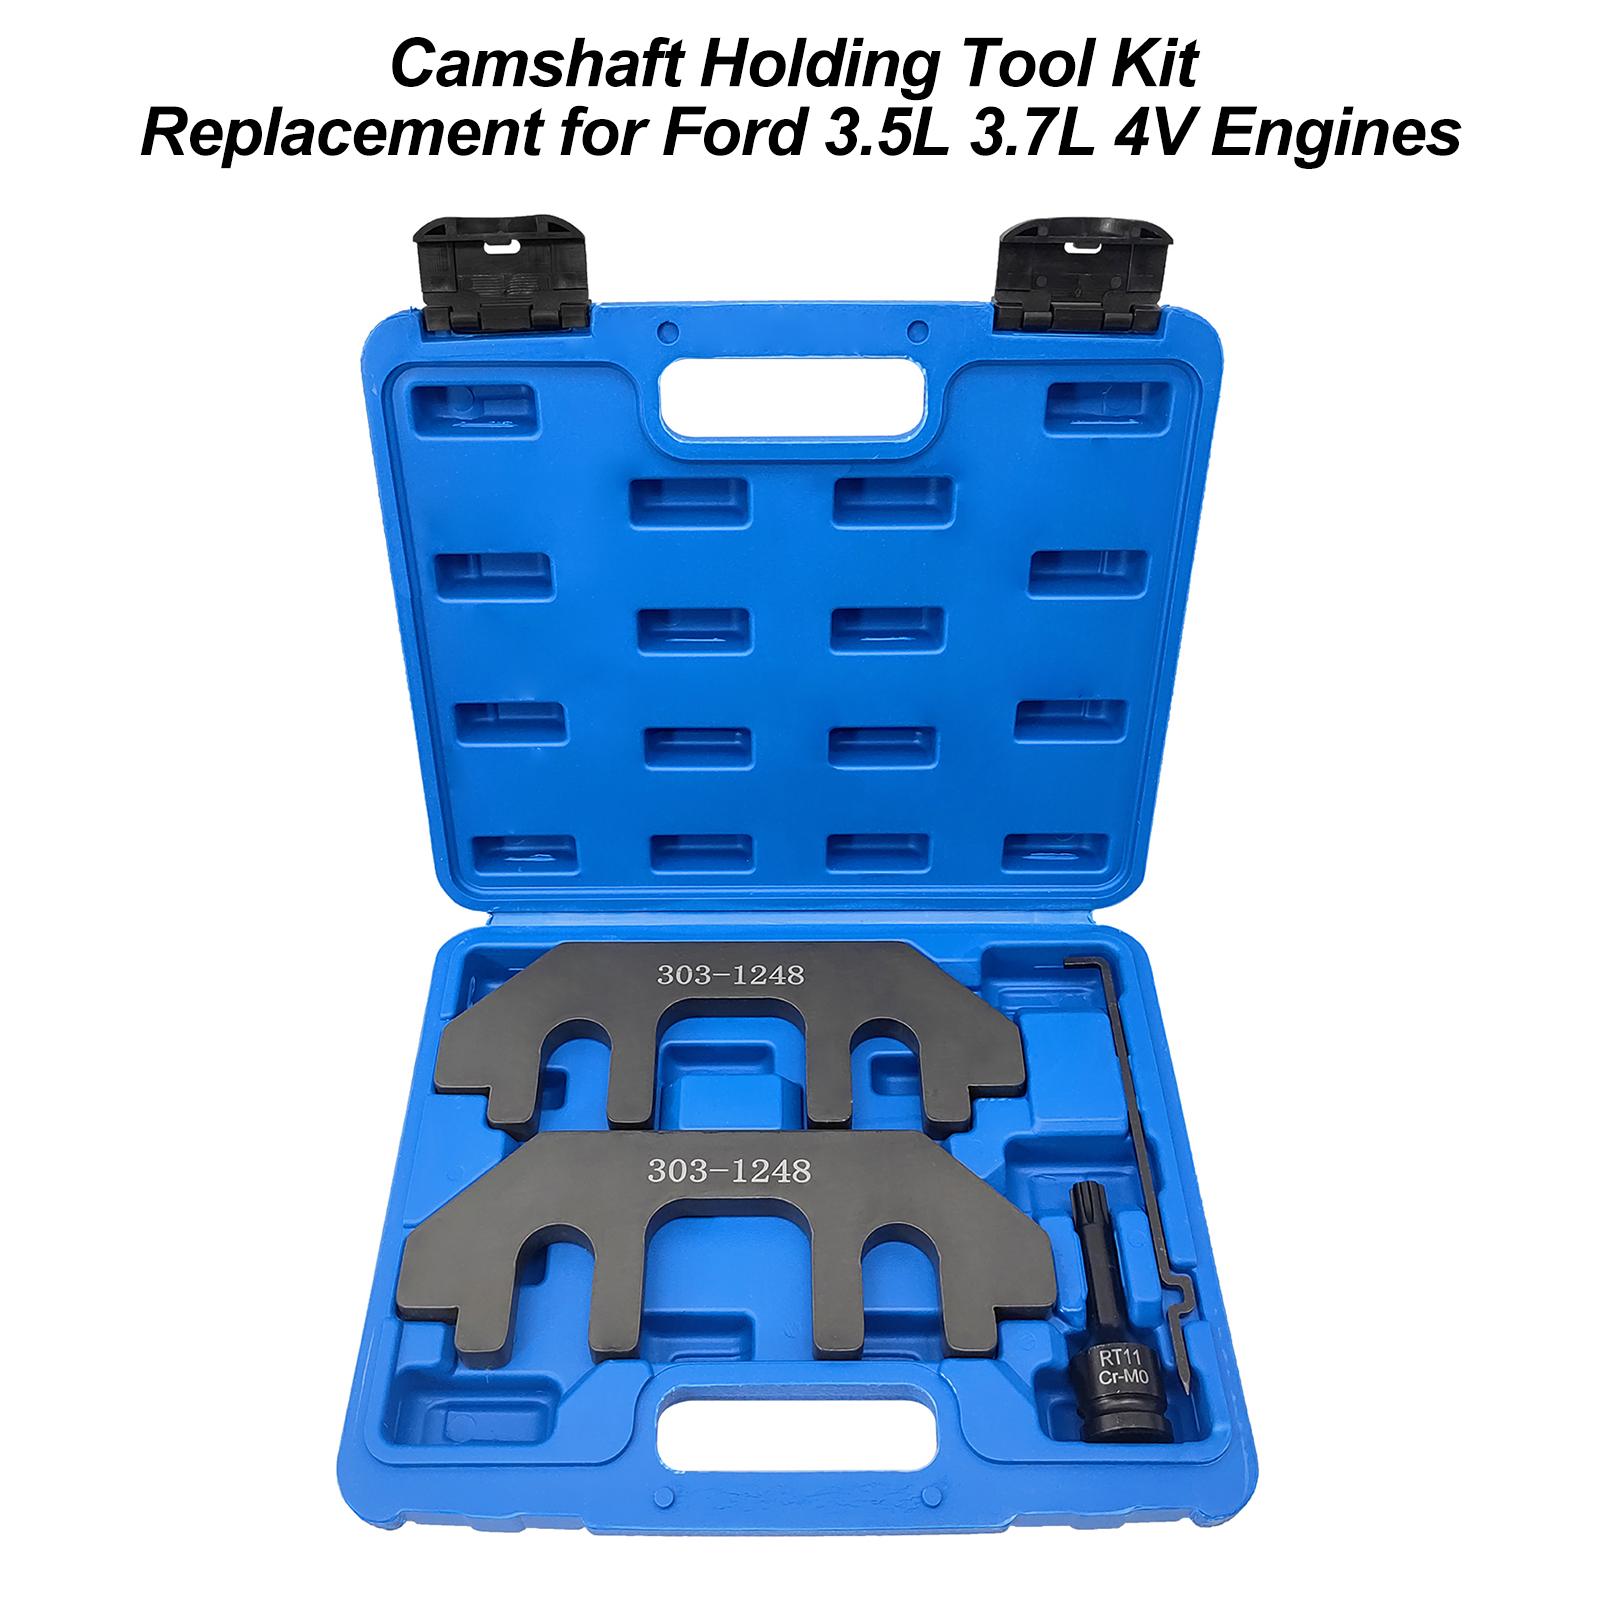 Engine Timing Tool Timing Engine Camshaft Locking Tool Camshaft Holding Tool Kit Replacement for Ford 3.5L 3.7L 4V Engines